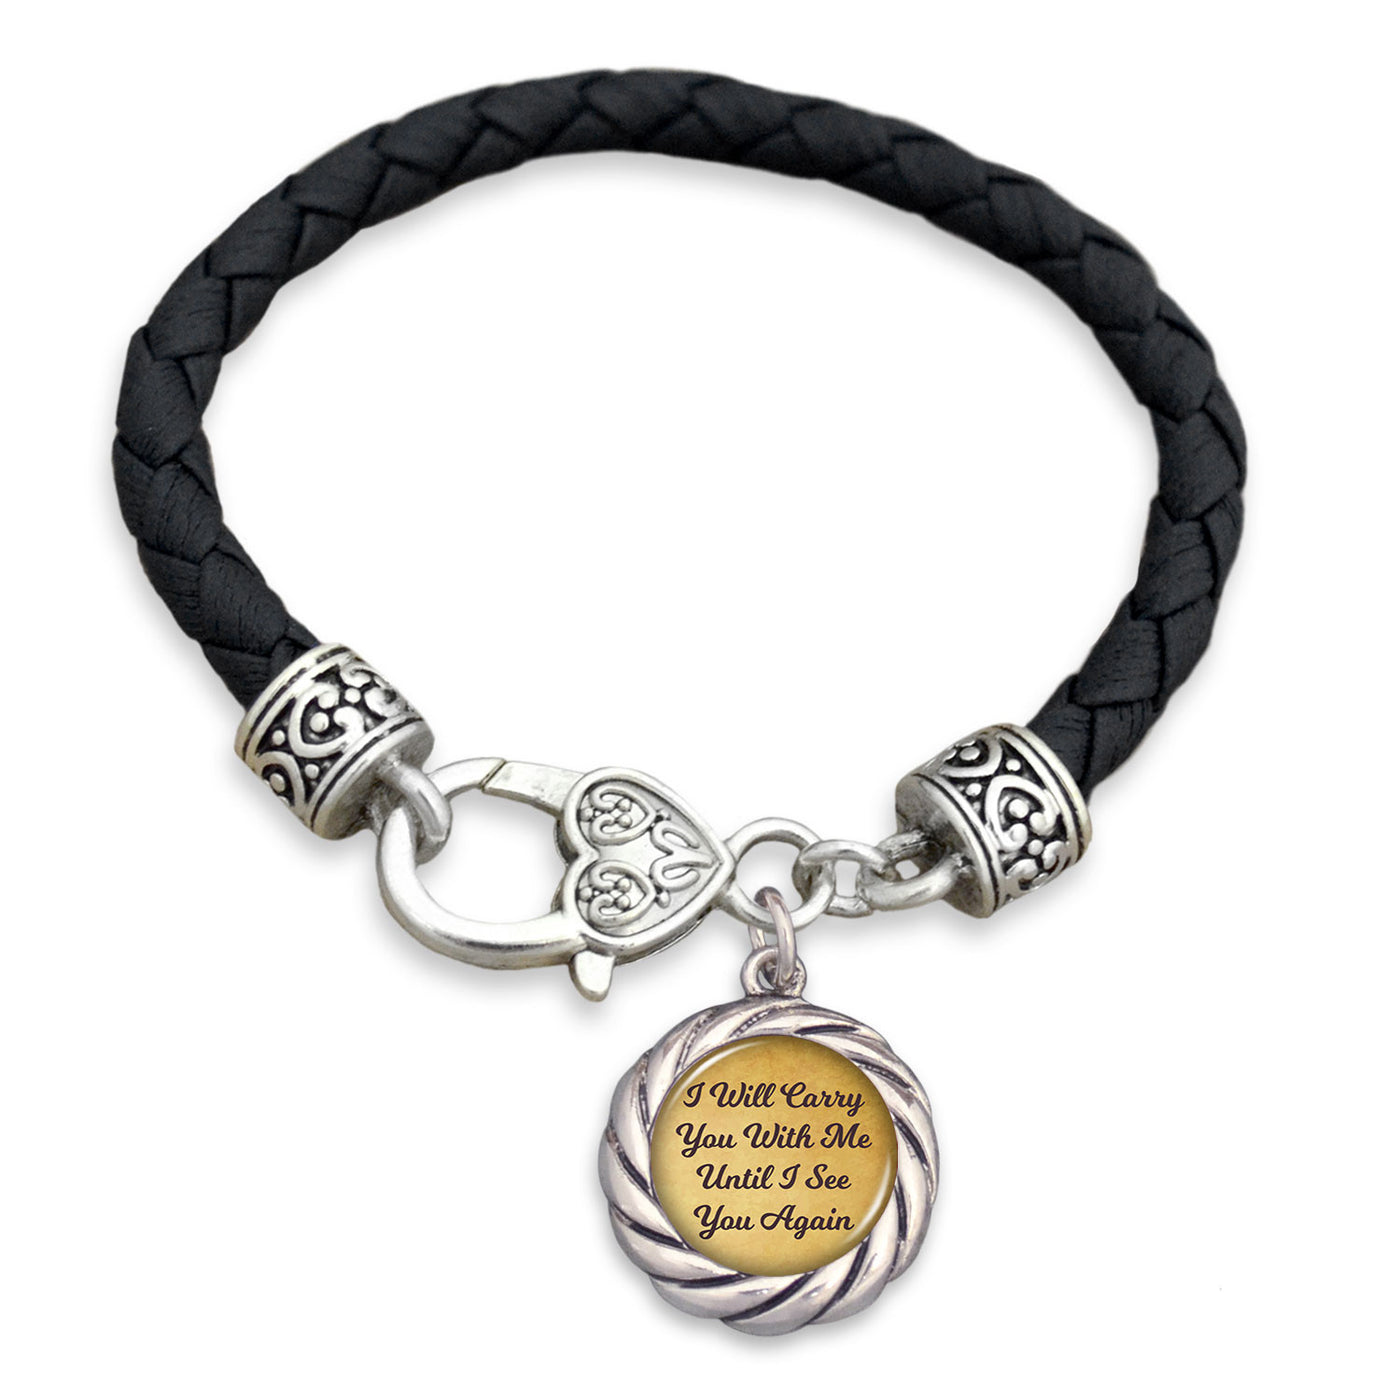 Carry You With Me Leather Toggle Bracelet